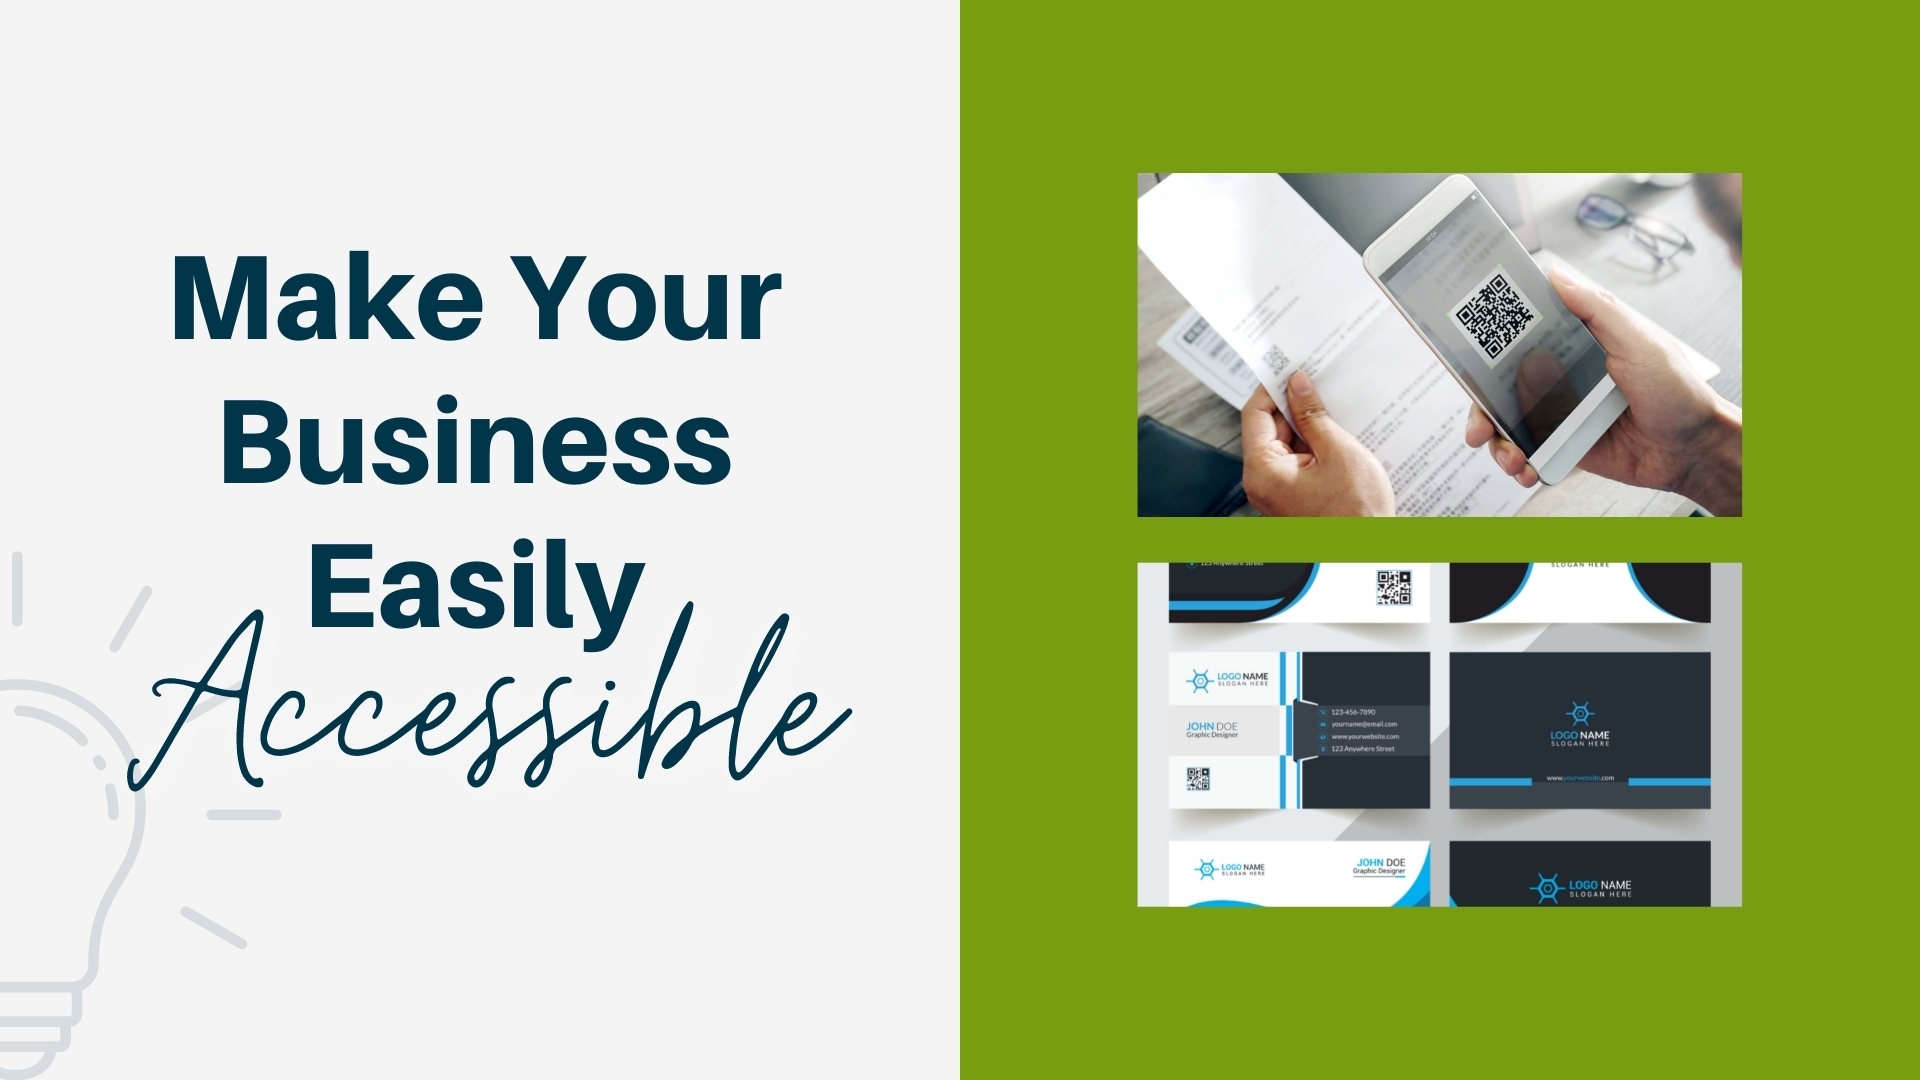 Make Your Business Easily Accessible